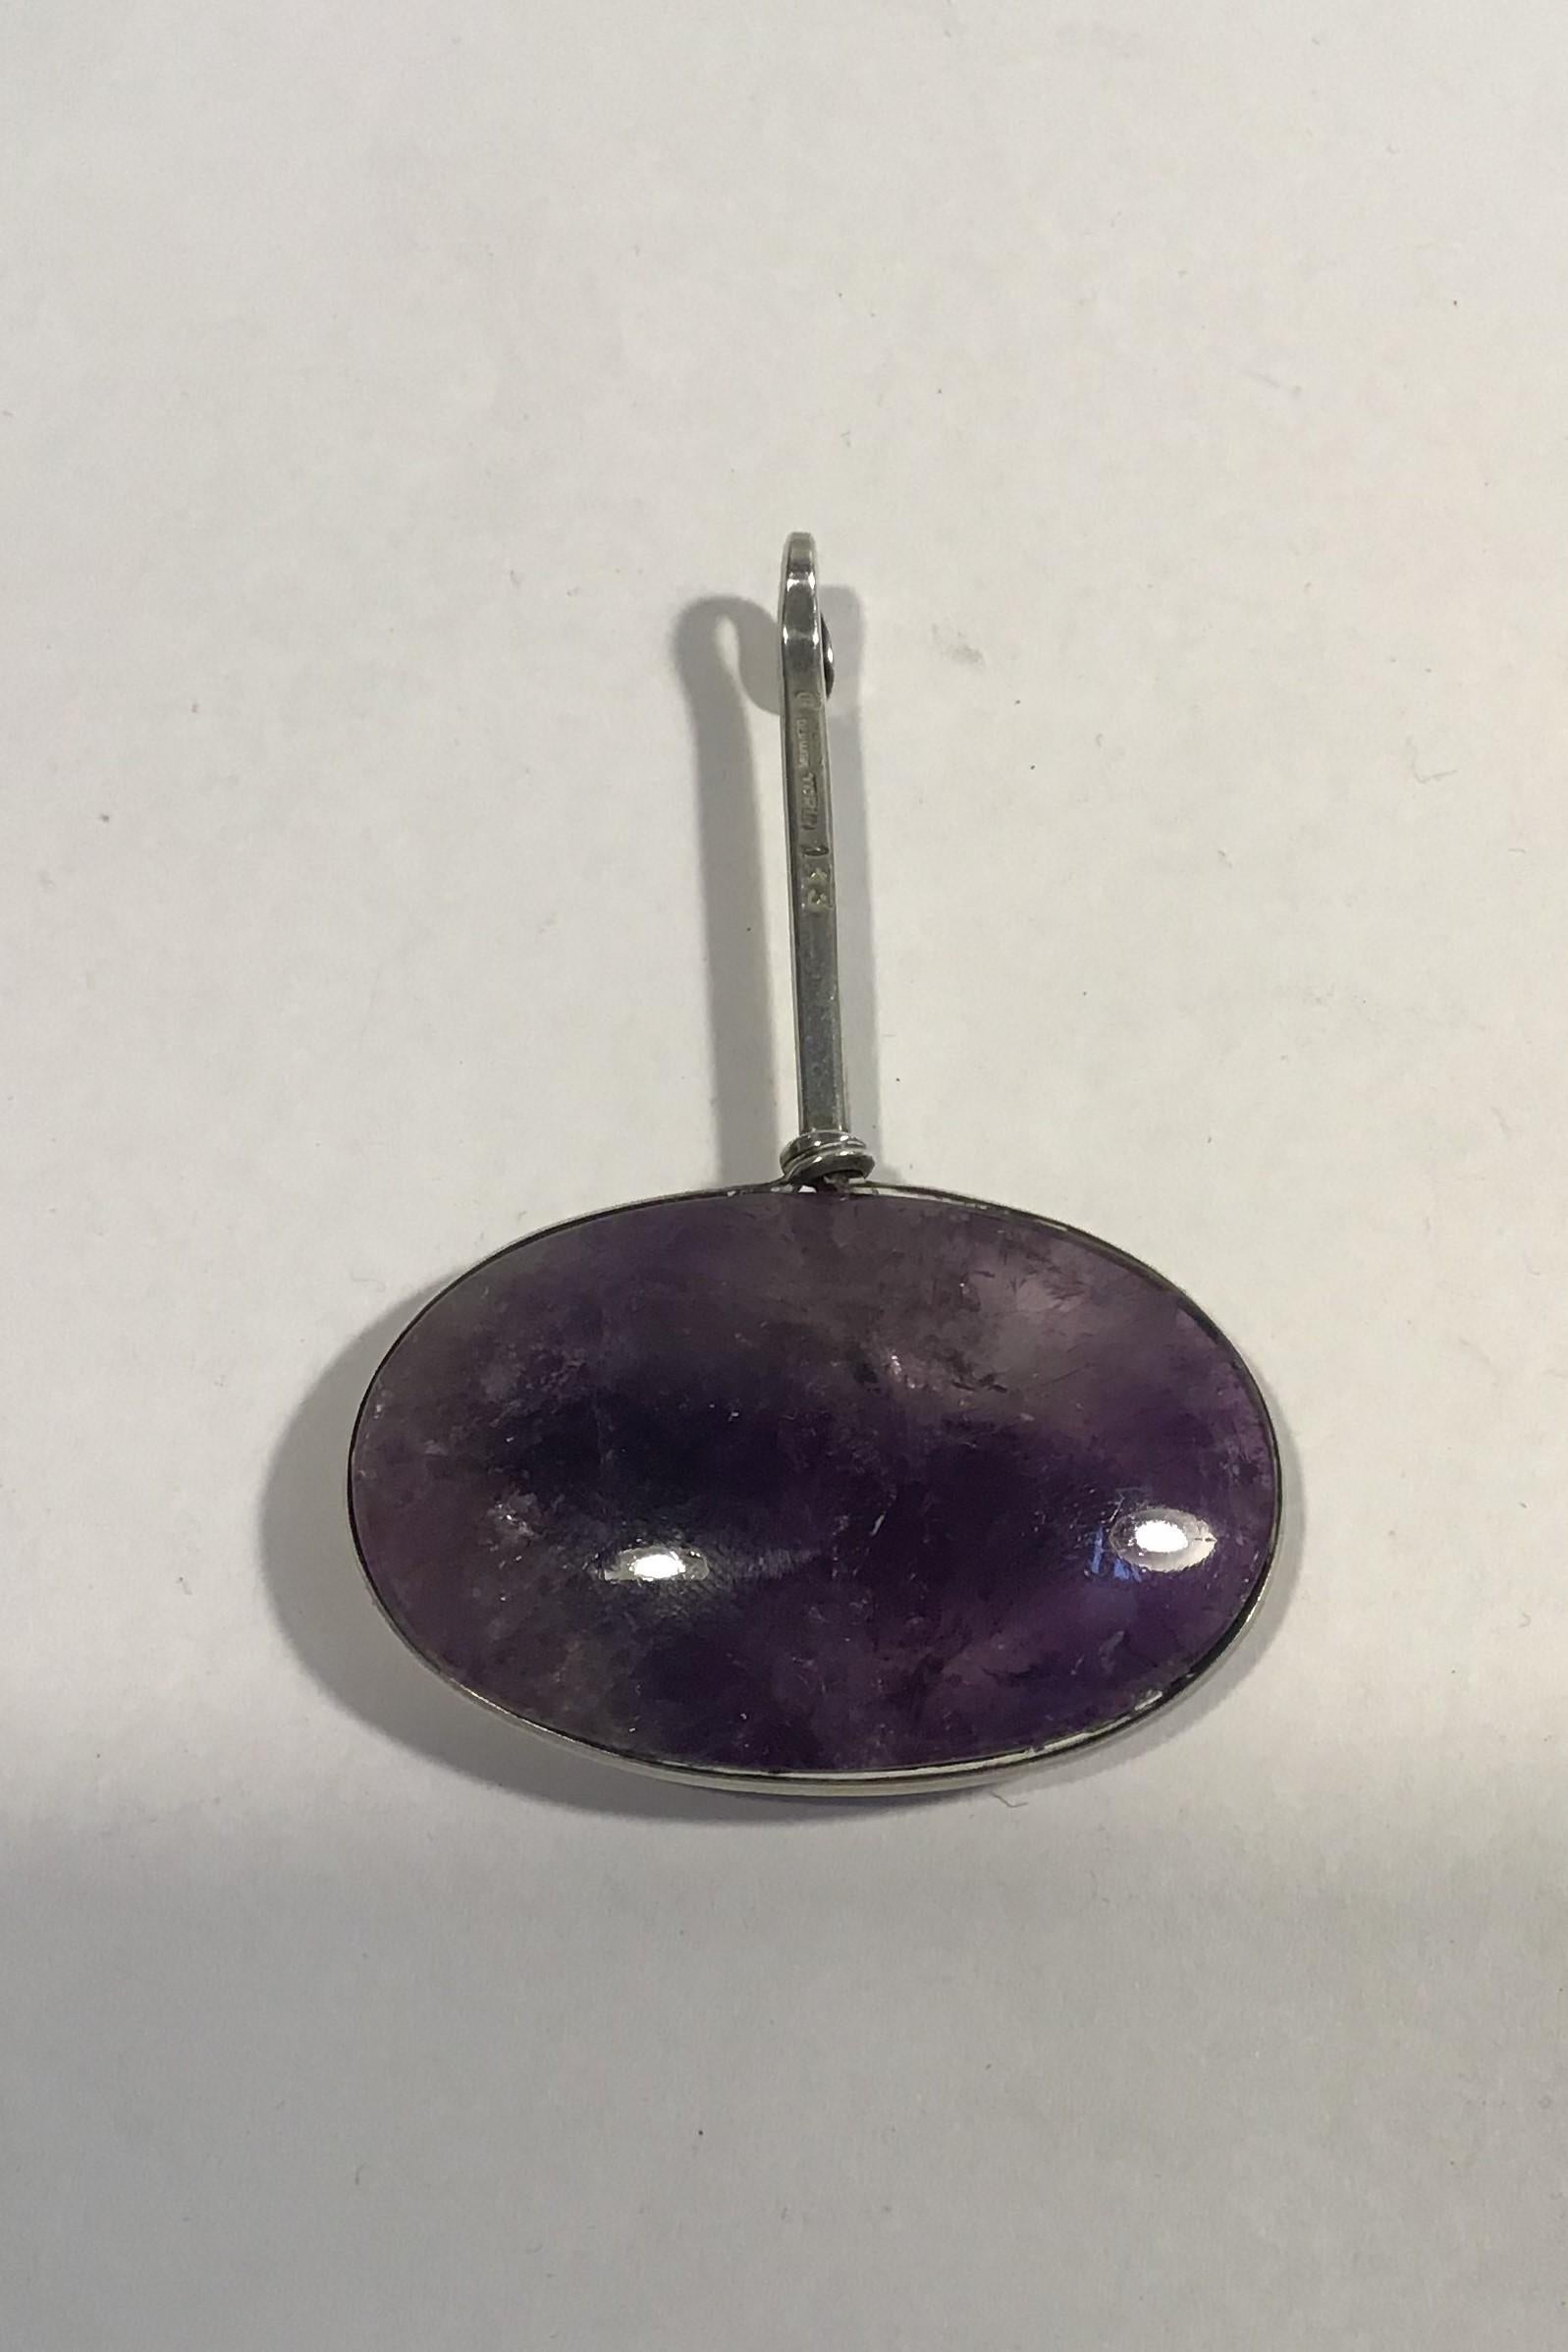 Georg Jensen Sterling Silver Torun Pendant No 133

Measures L 6.7 cm (2 23/32 in) 
Weight 21.8 gr/ 0.77 oz (Chipped stone)

